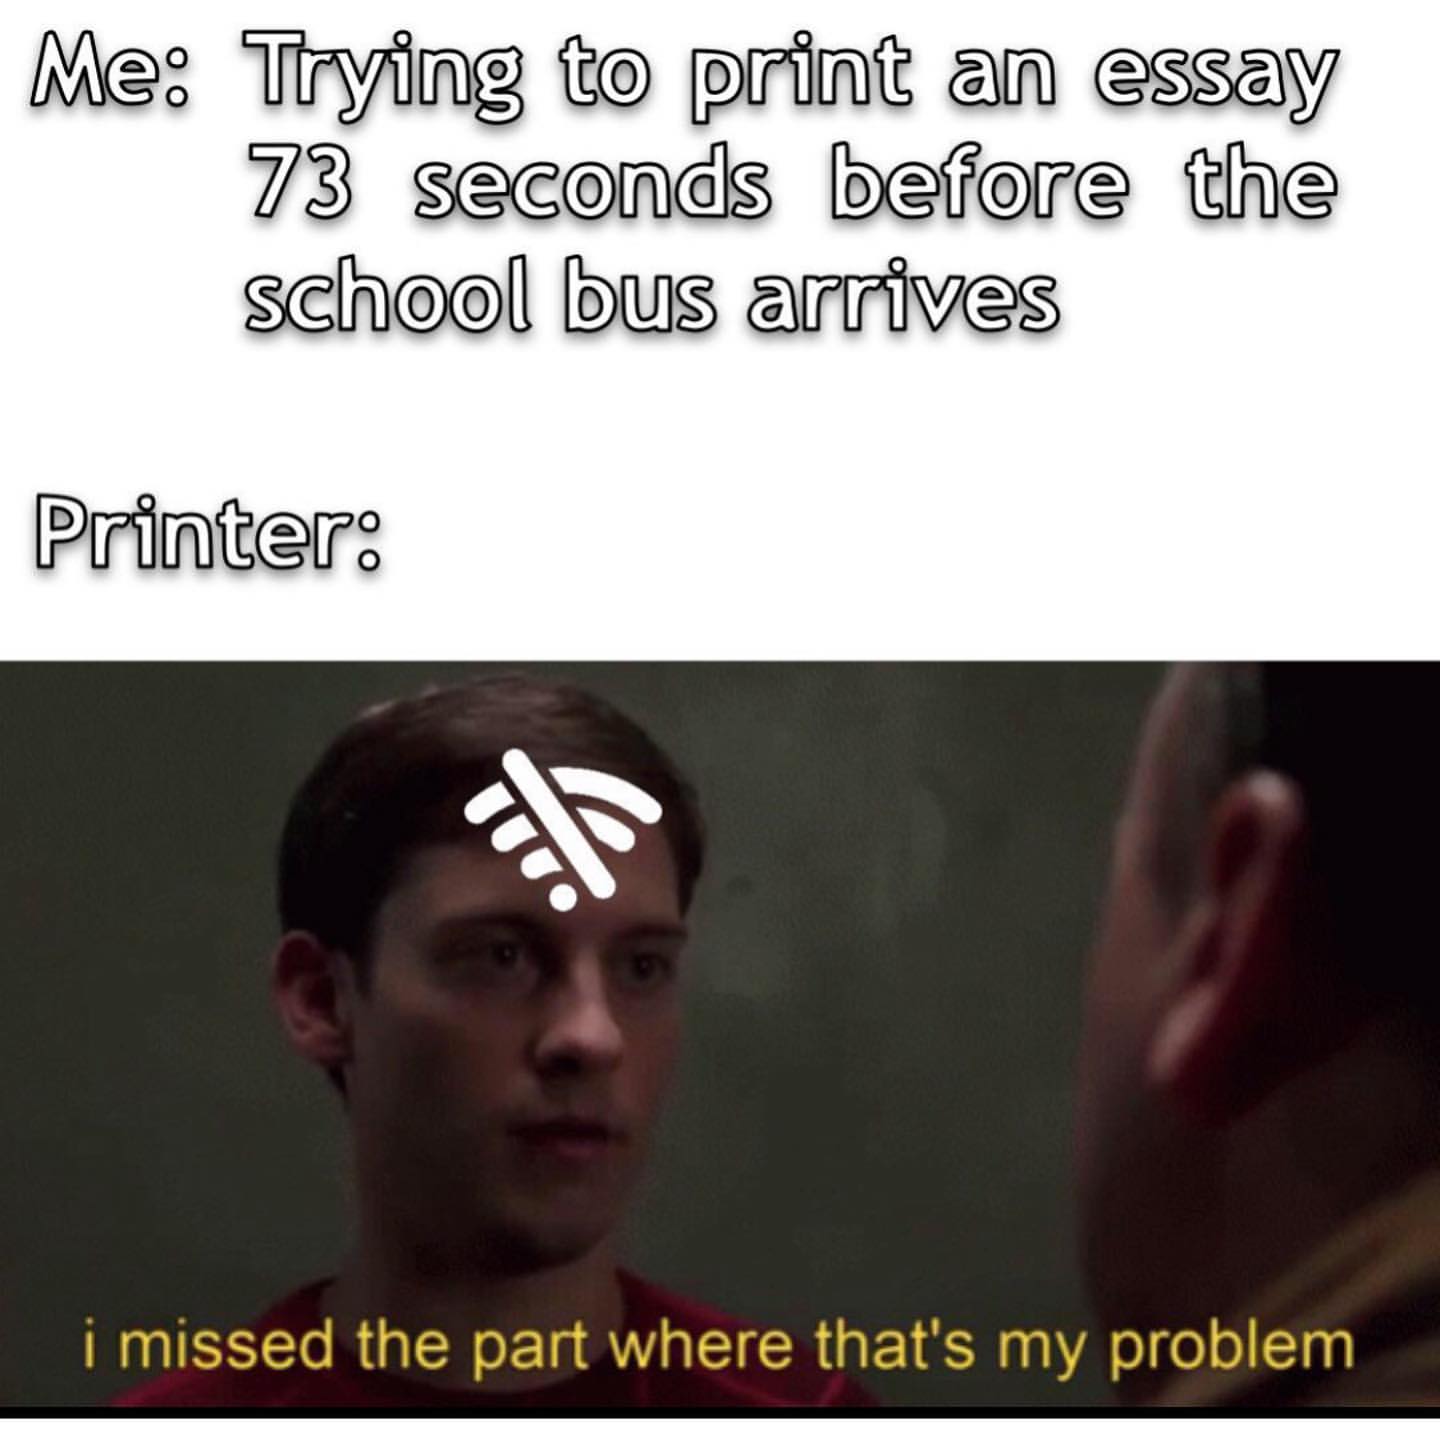 Me: Trying to print an essay 73 seconds before the school bus arrives. Printer: I missed the part where that's my problem.